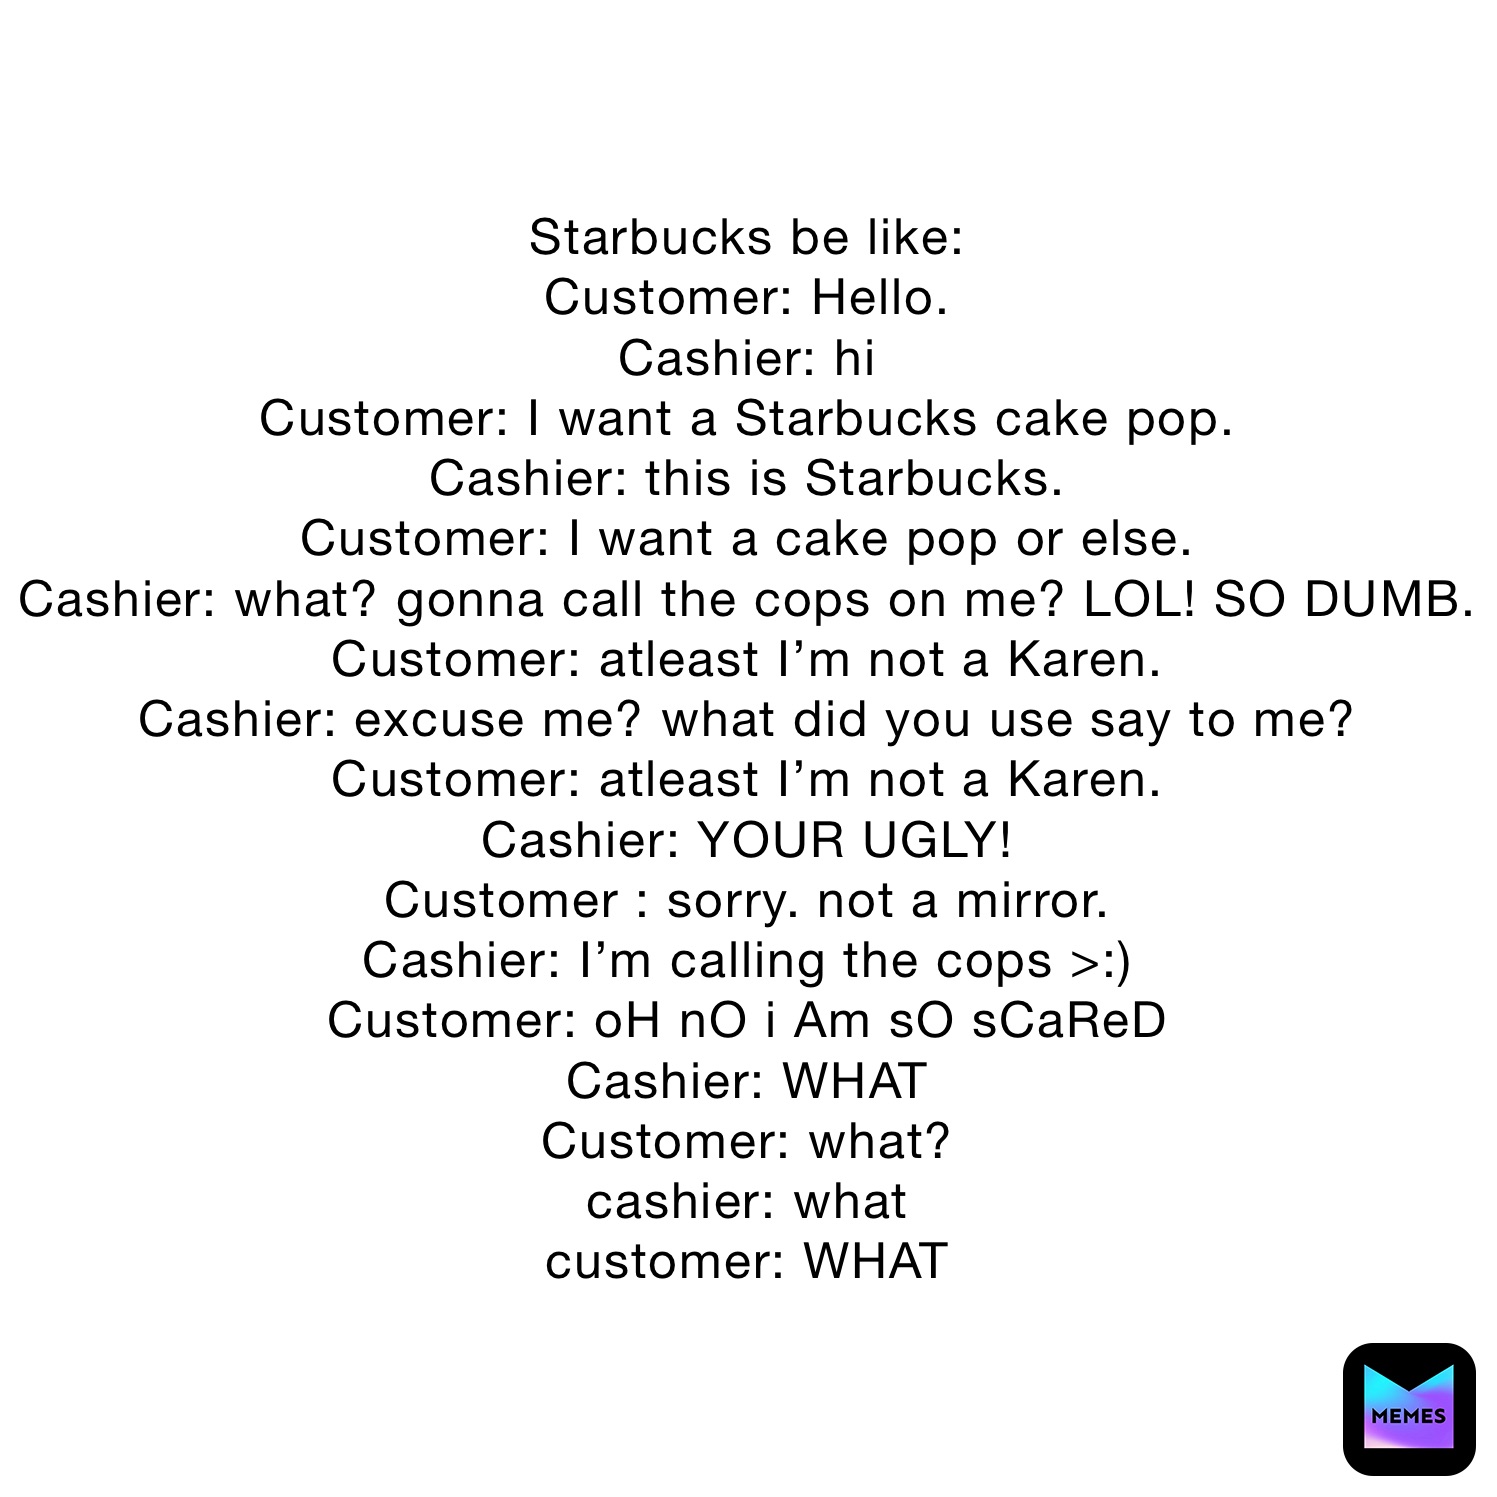 Starbucks be like:
Customer: Hello.
Cashier: hi
Customer: I want a Starbucks cake pop.
Cashier: this is Starbucks.
Customer: I want a cake pop or else.
Cashier: what? gonna call the cops on me? LOL! SO DUMB.
Customer: atleast I’m not a Karen.
Cashier: excuse me? what did you use say to me?
Customer: atleast I’m not a Karen.
Cashier: YOUR UGLY!
Customer : sorry. not a mirror.
Cashier: I’m calling the cops >:) 
Customer: oH nO i Am sO sCaReD
Cashier: WHAT
Customer: what?
cashier: what
customer: WHAT